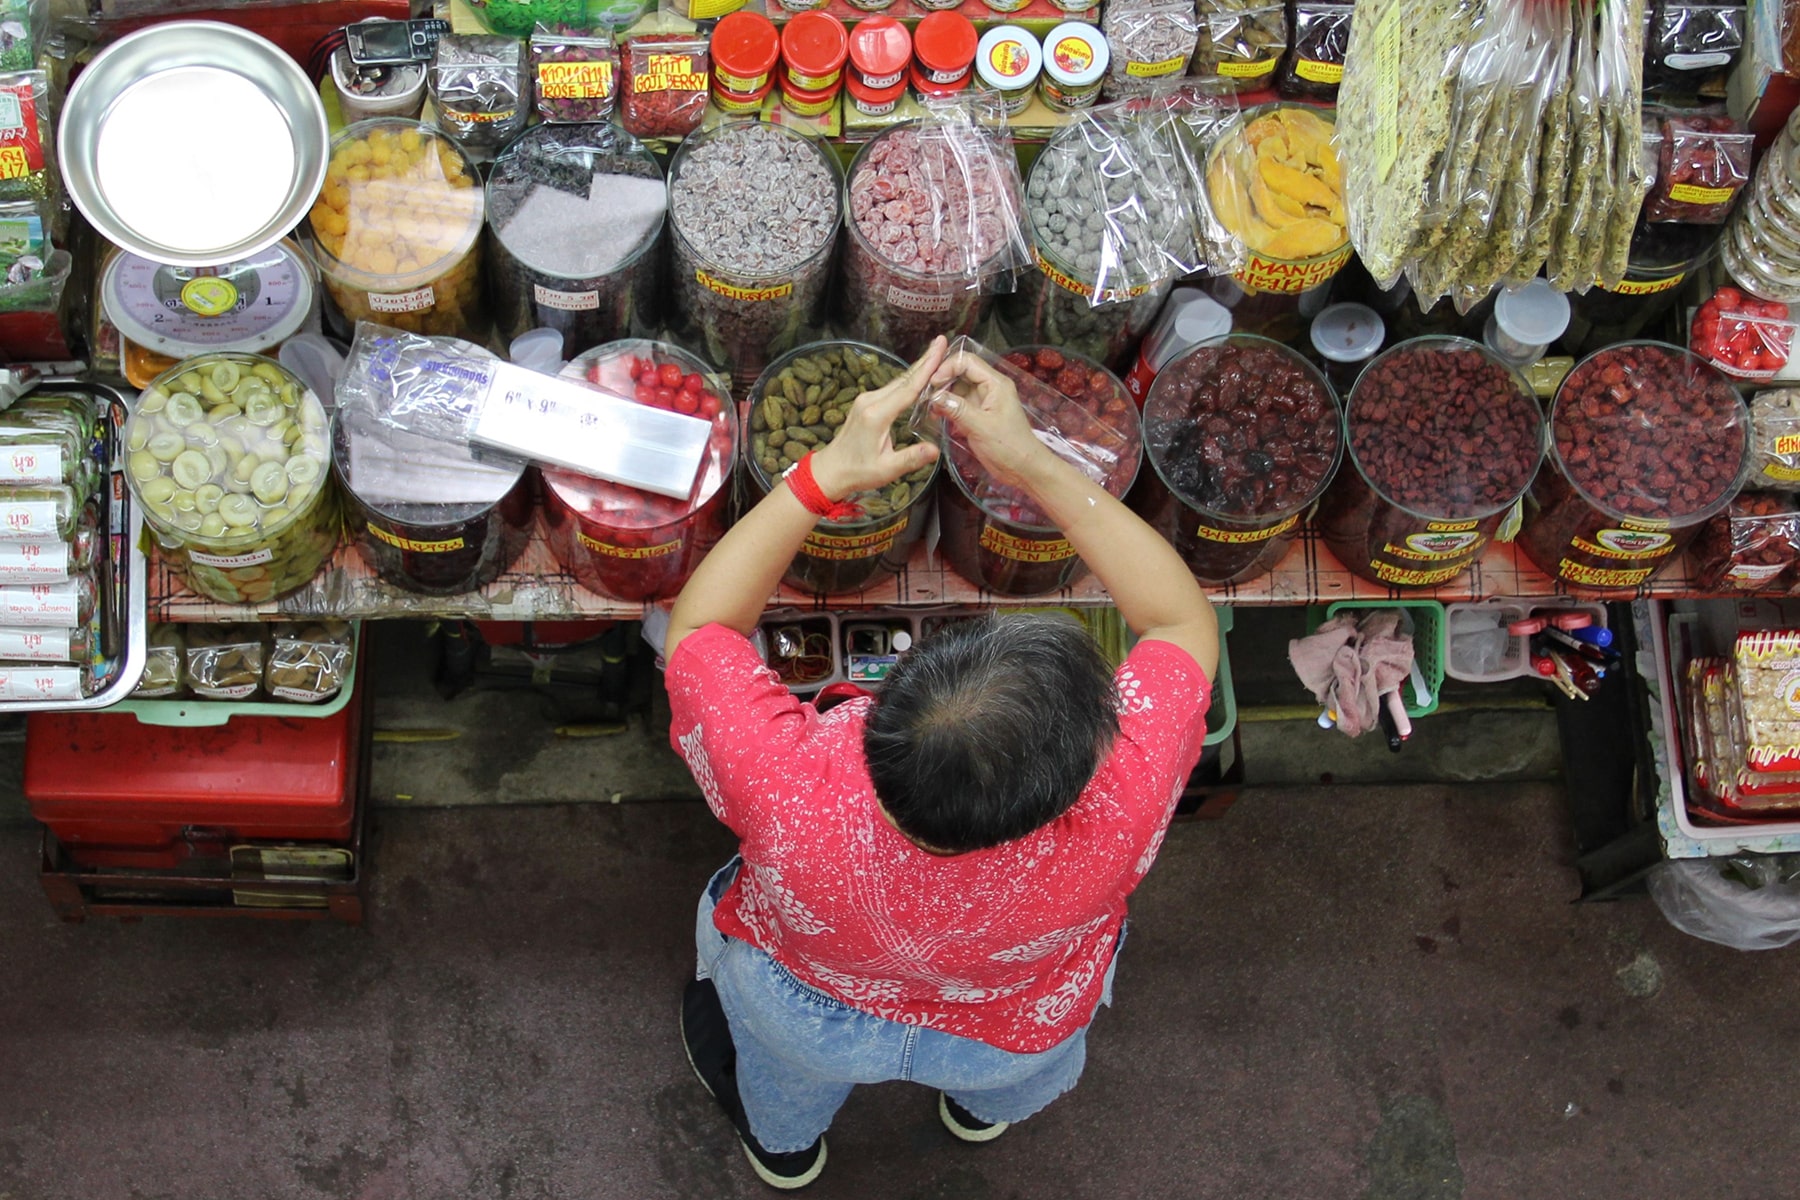 Olive seller in Chiang Mai market from above